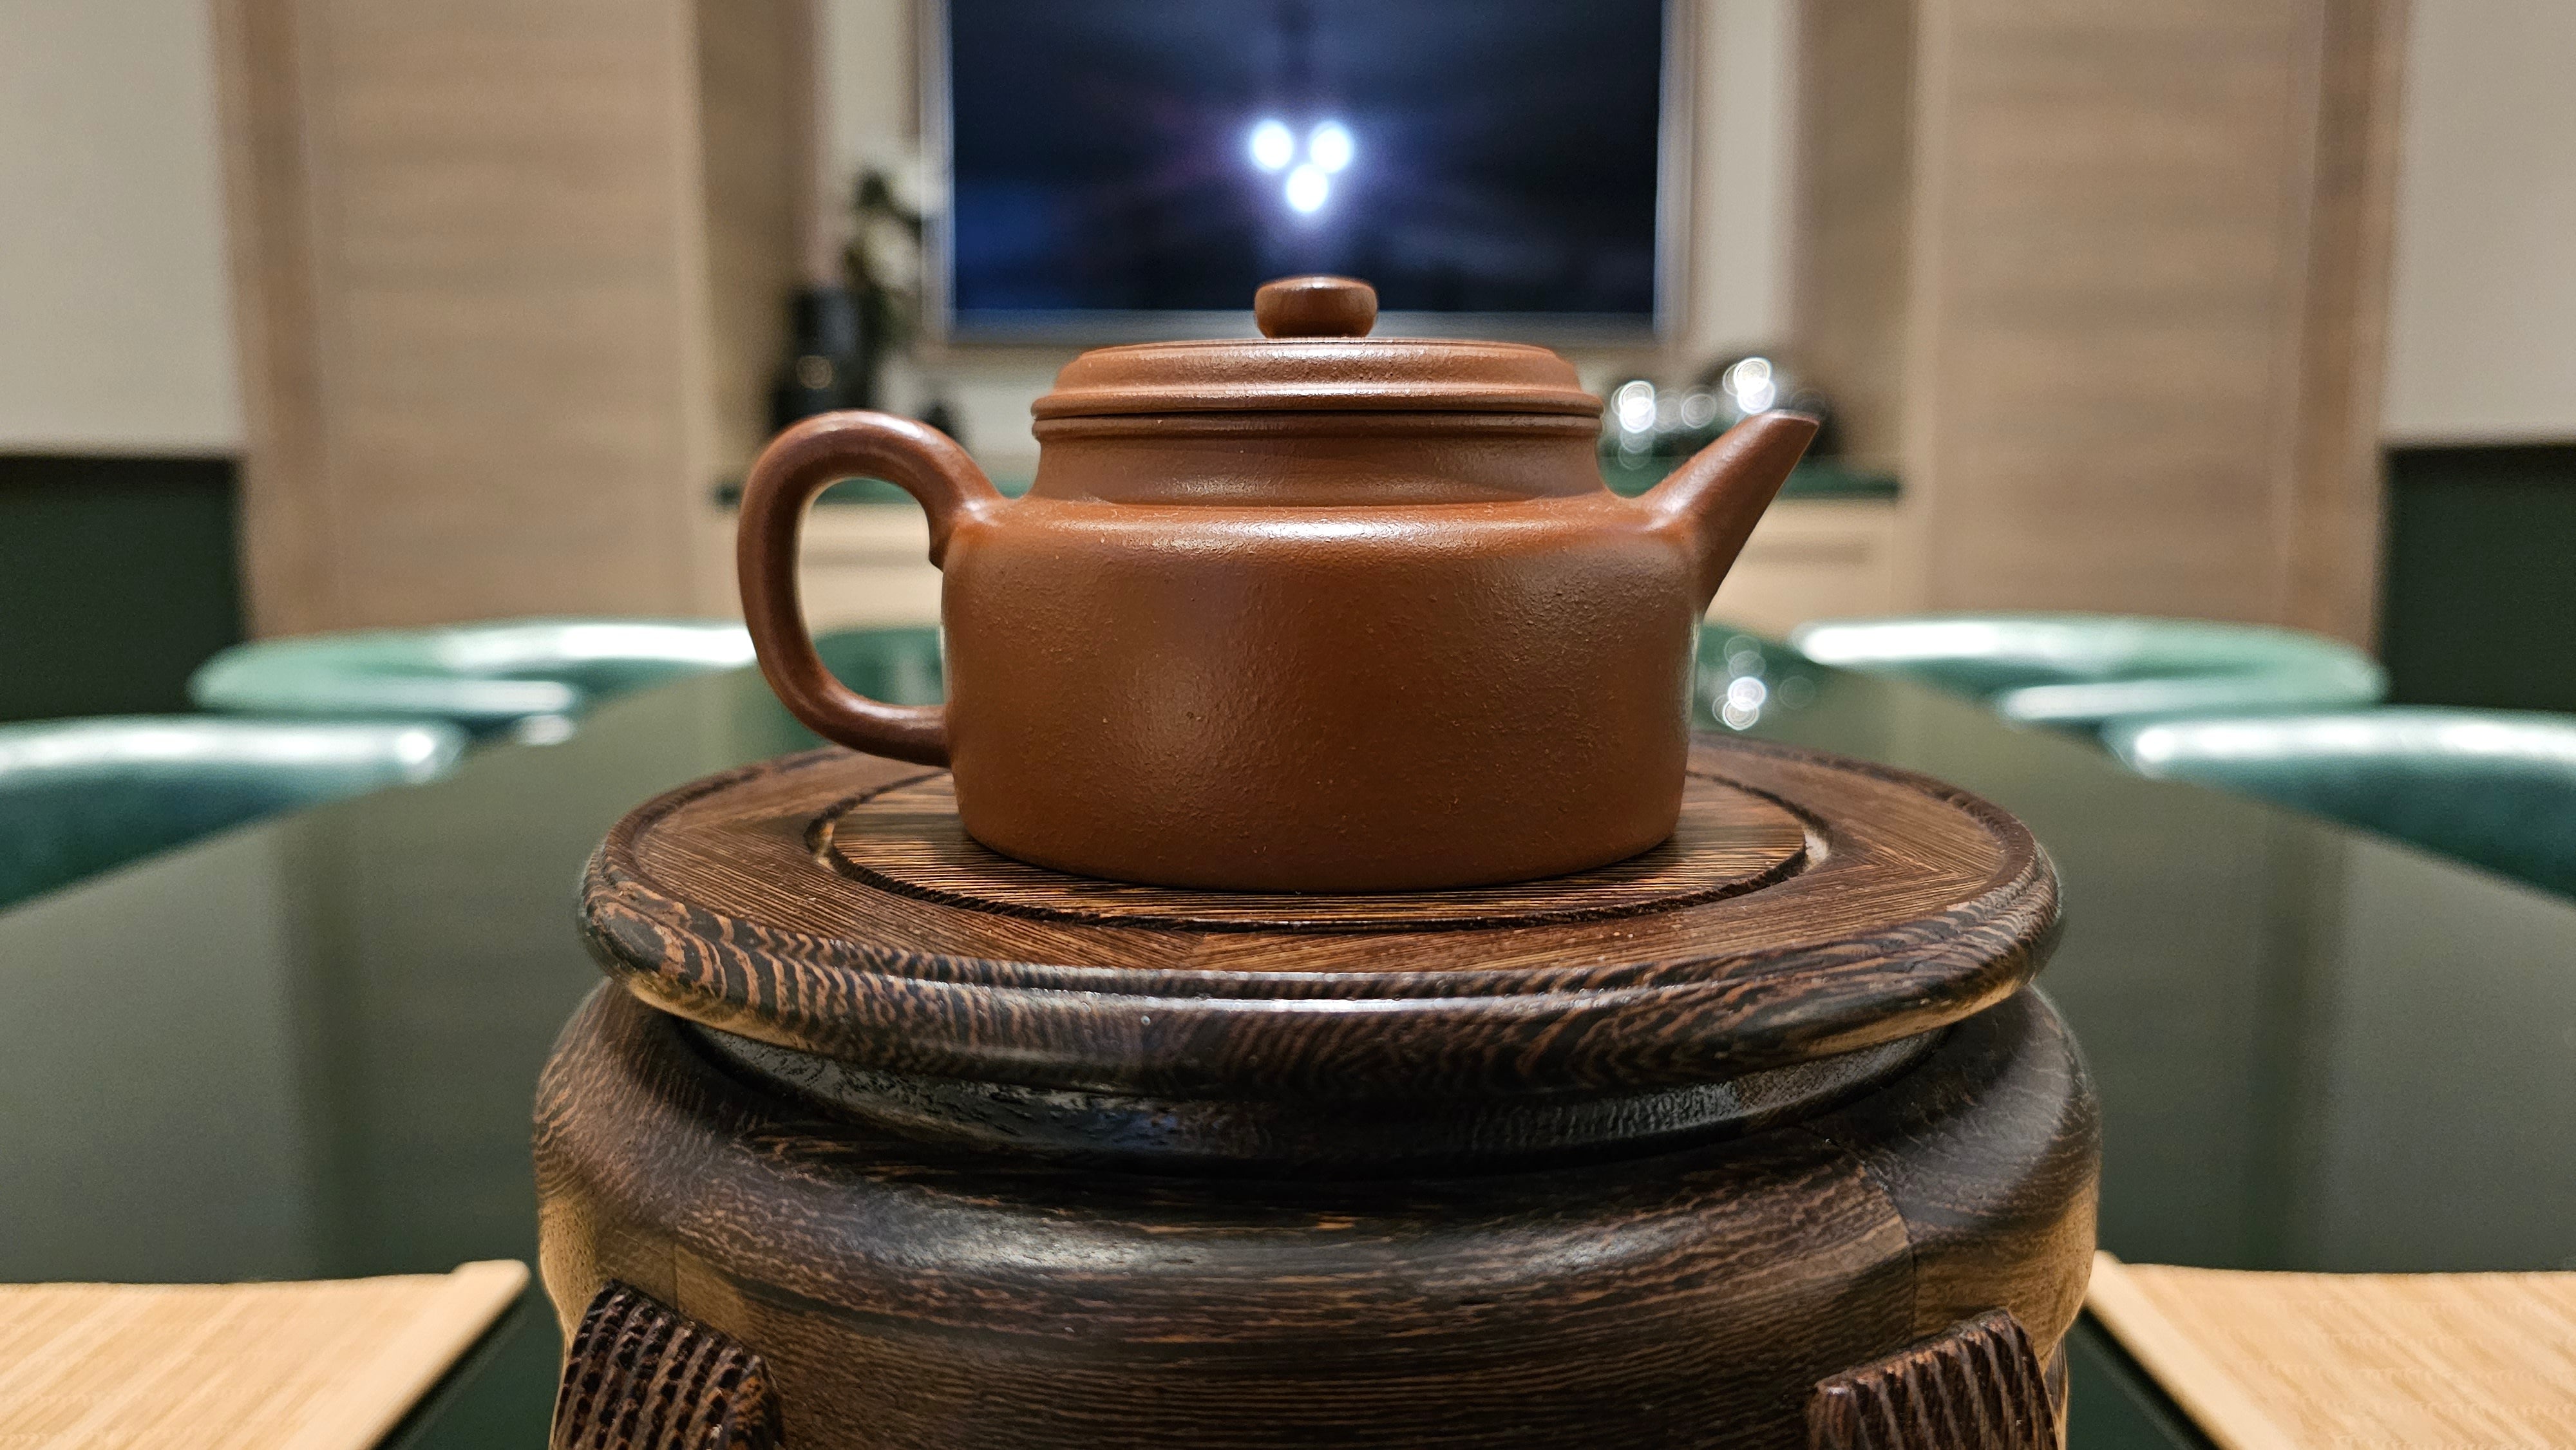 De Zhong 德钟, Yuan Kuang Da Hong Pao 原矿大红袍, made by L2 Senior Master Cao Lan Fang 国家高级工艺美术师～曹兰芳。- commissioned in Jan 2022 for our esteemed Patron Prof Johnston (Melbourne), Shown here for viewing.